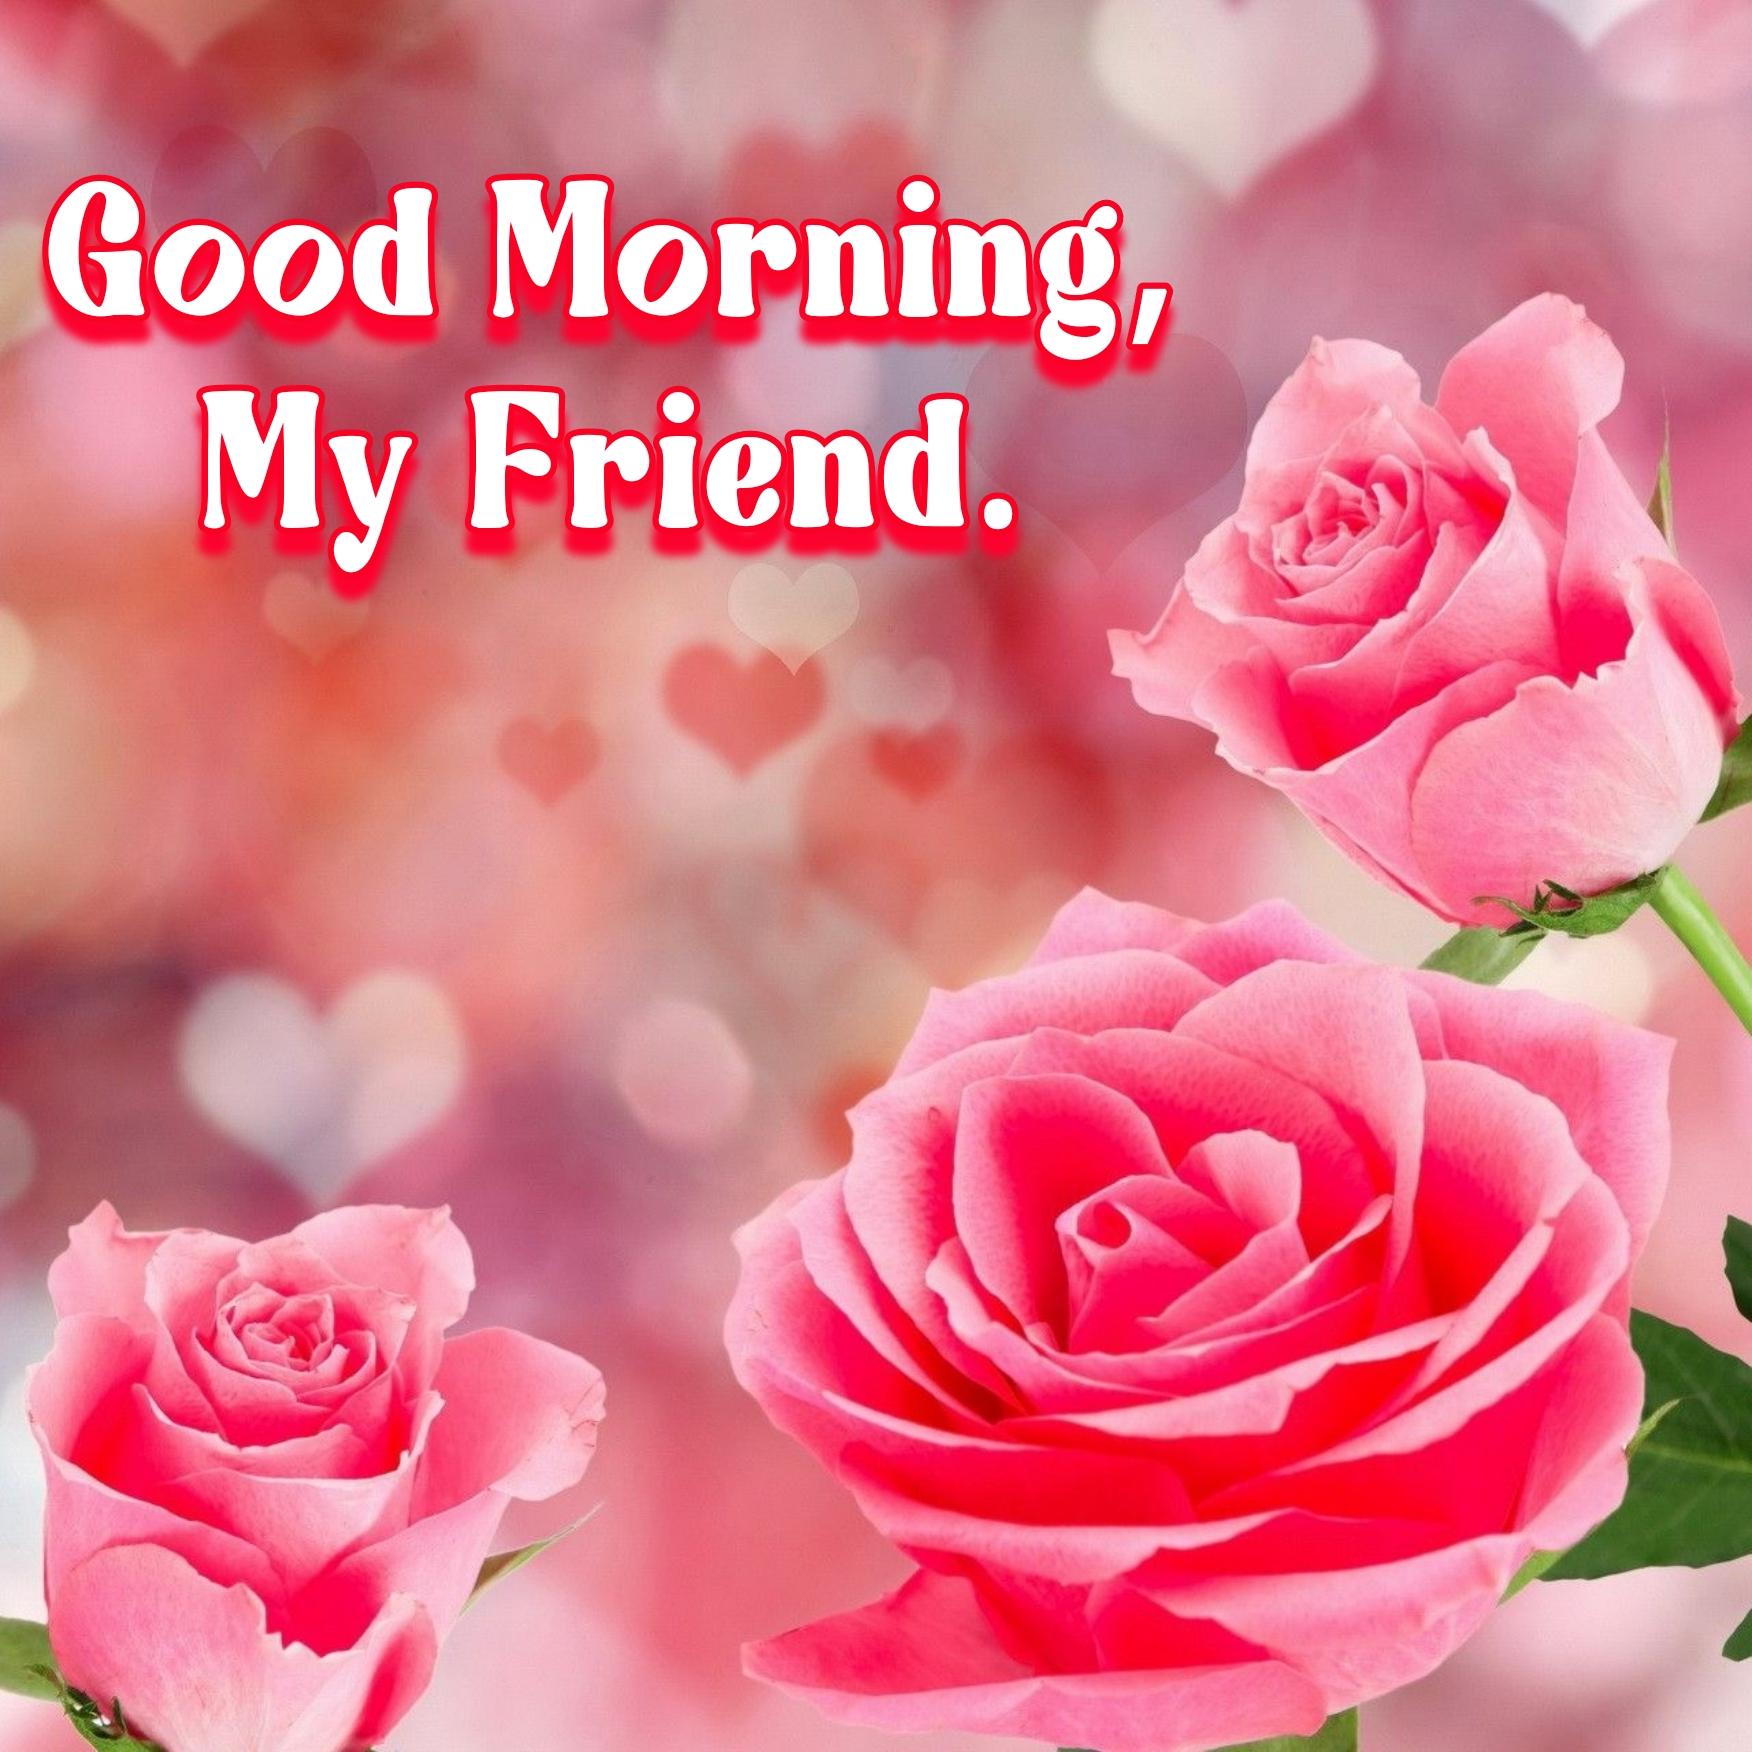 Good Morning My Friend Images